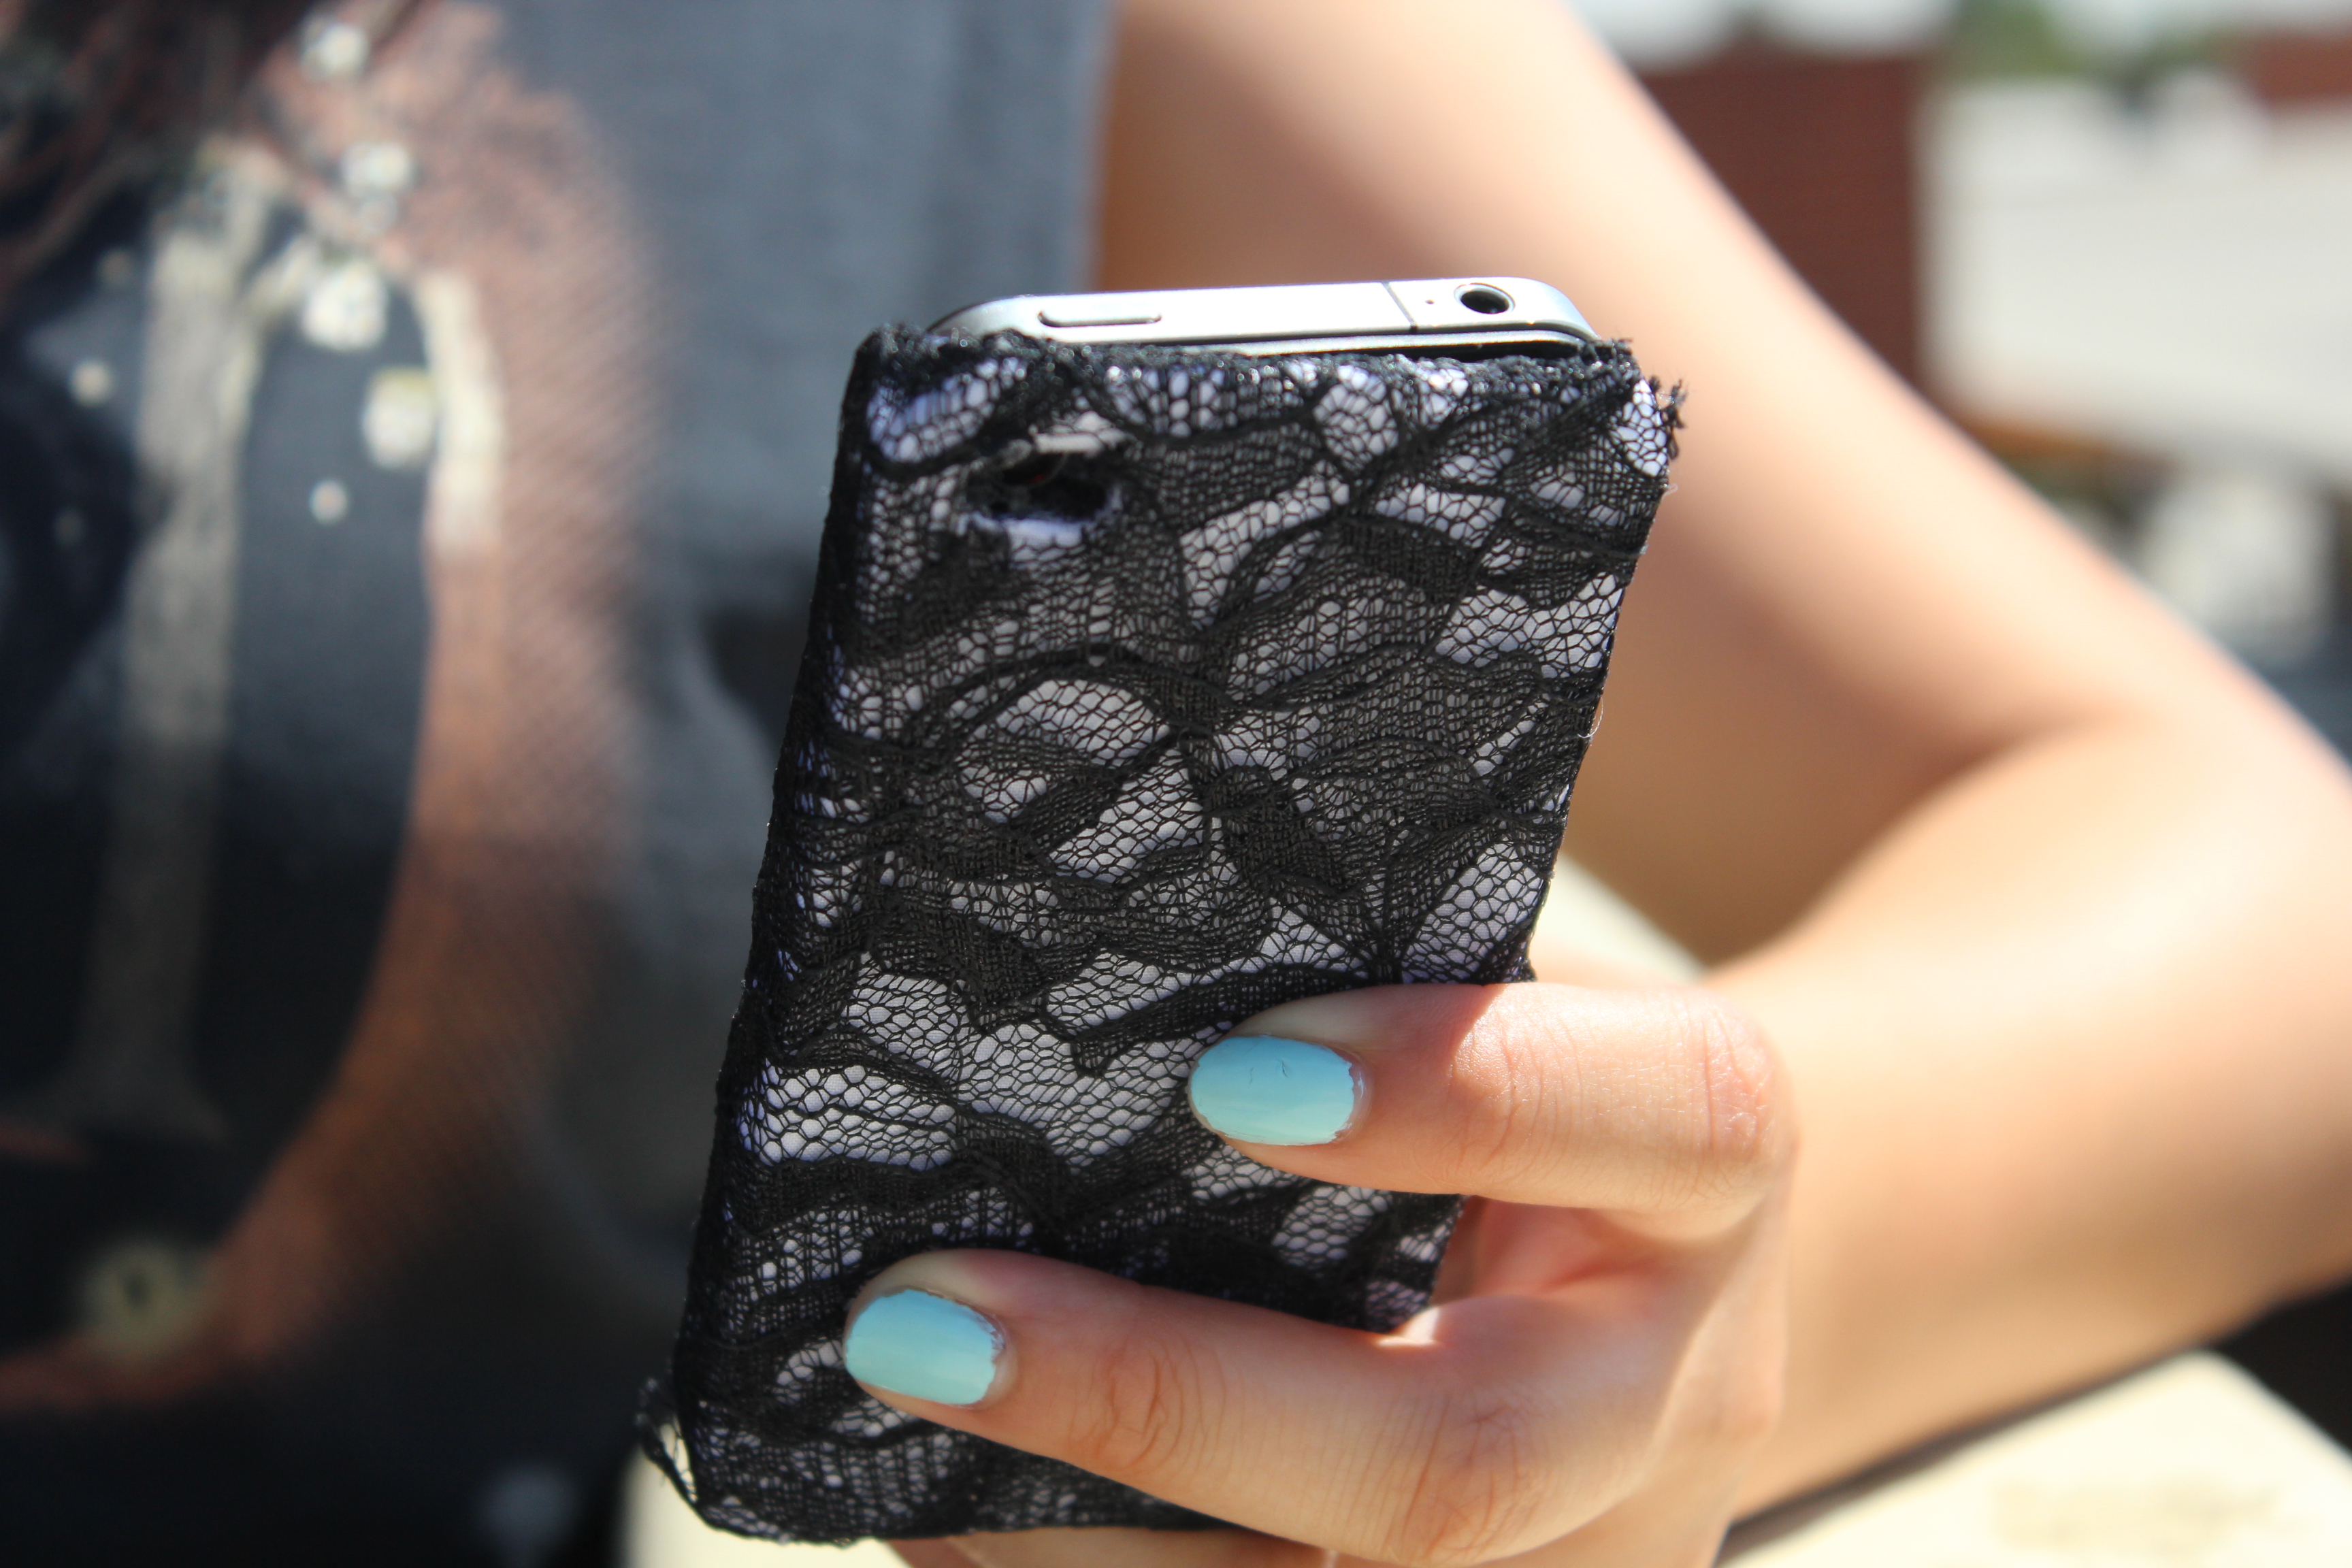 Get crafty and create one-of-a-kind phone cases